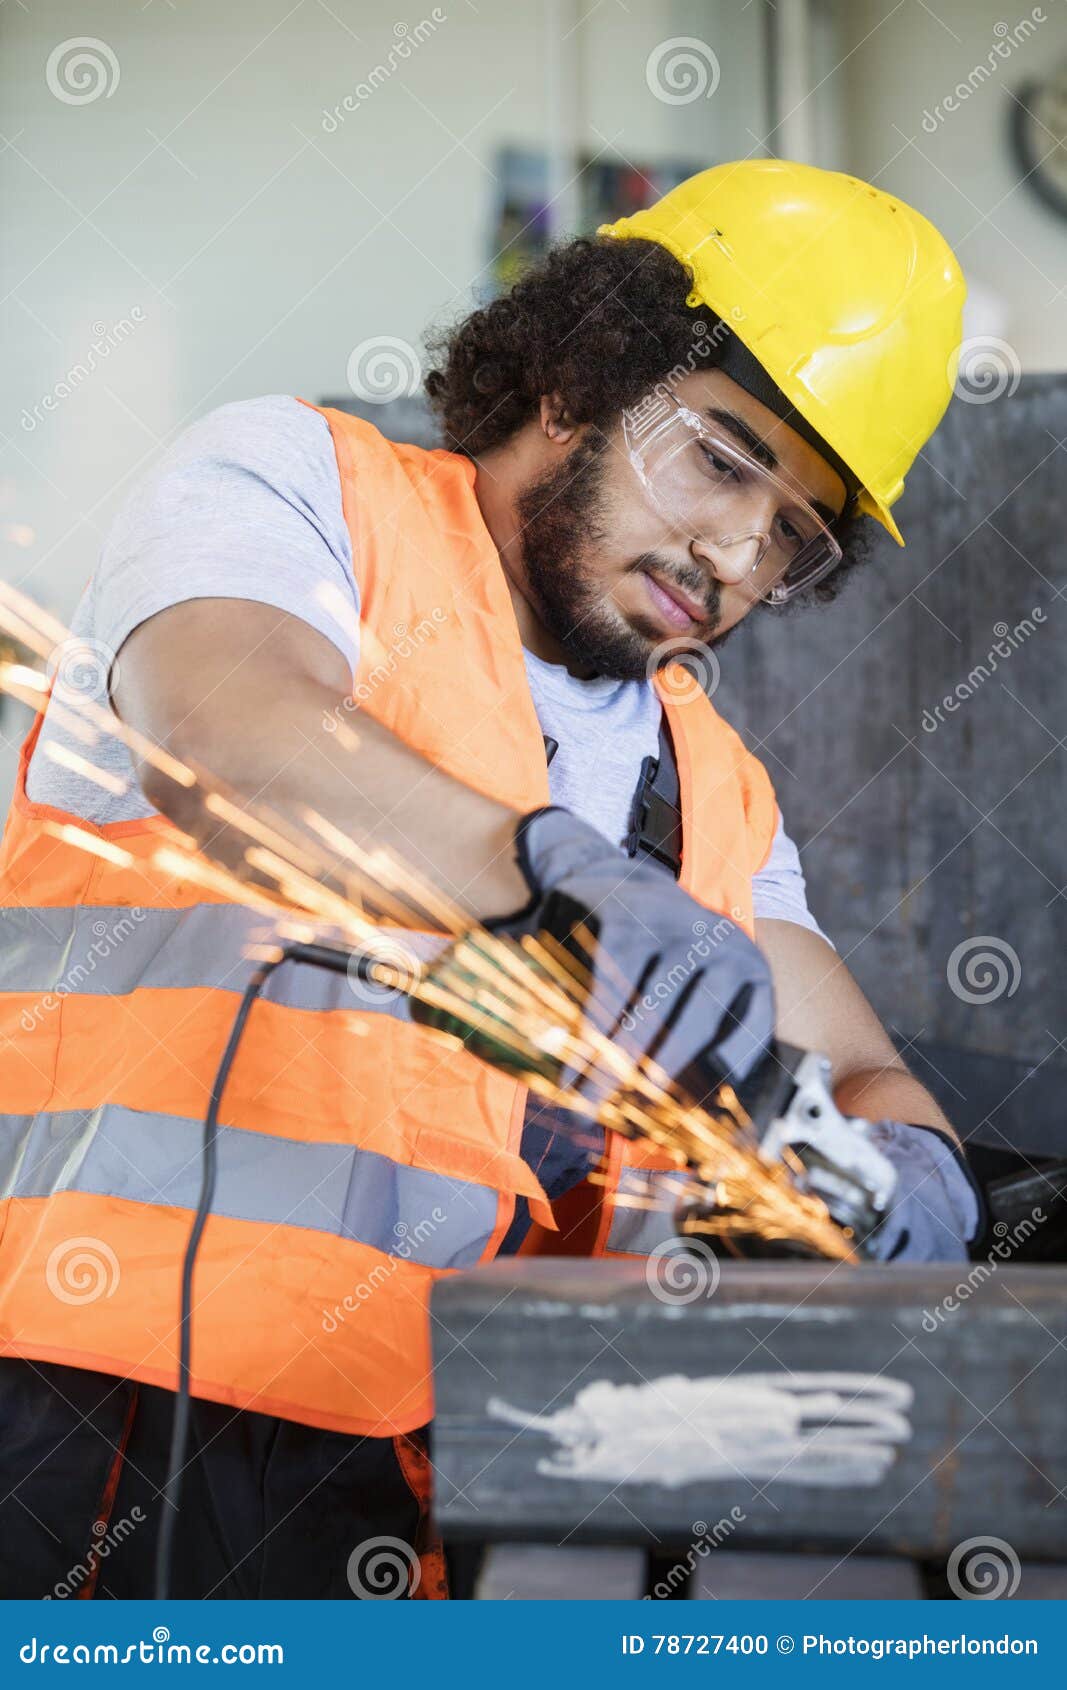 young manual worker in protective workwear grinding metal in industry